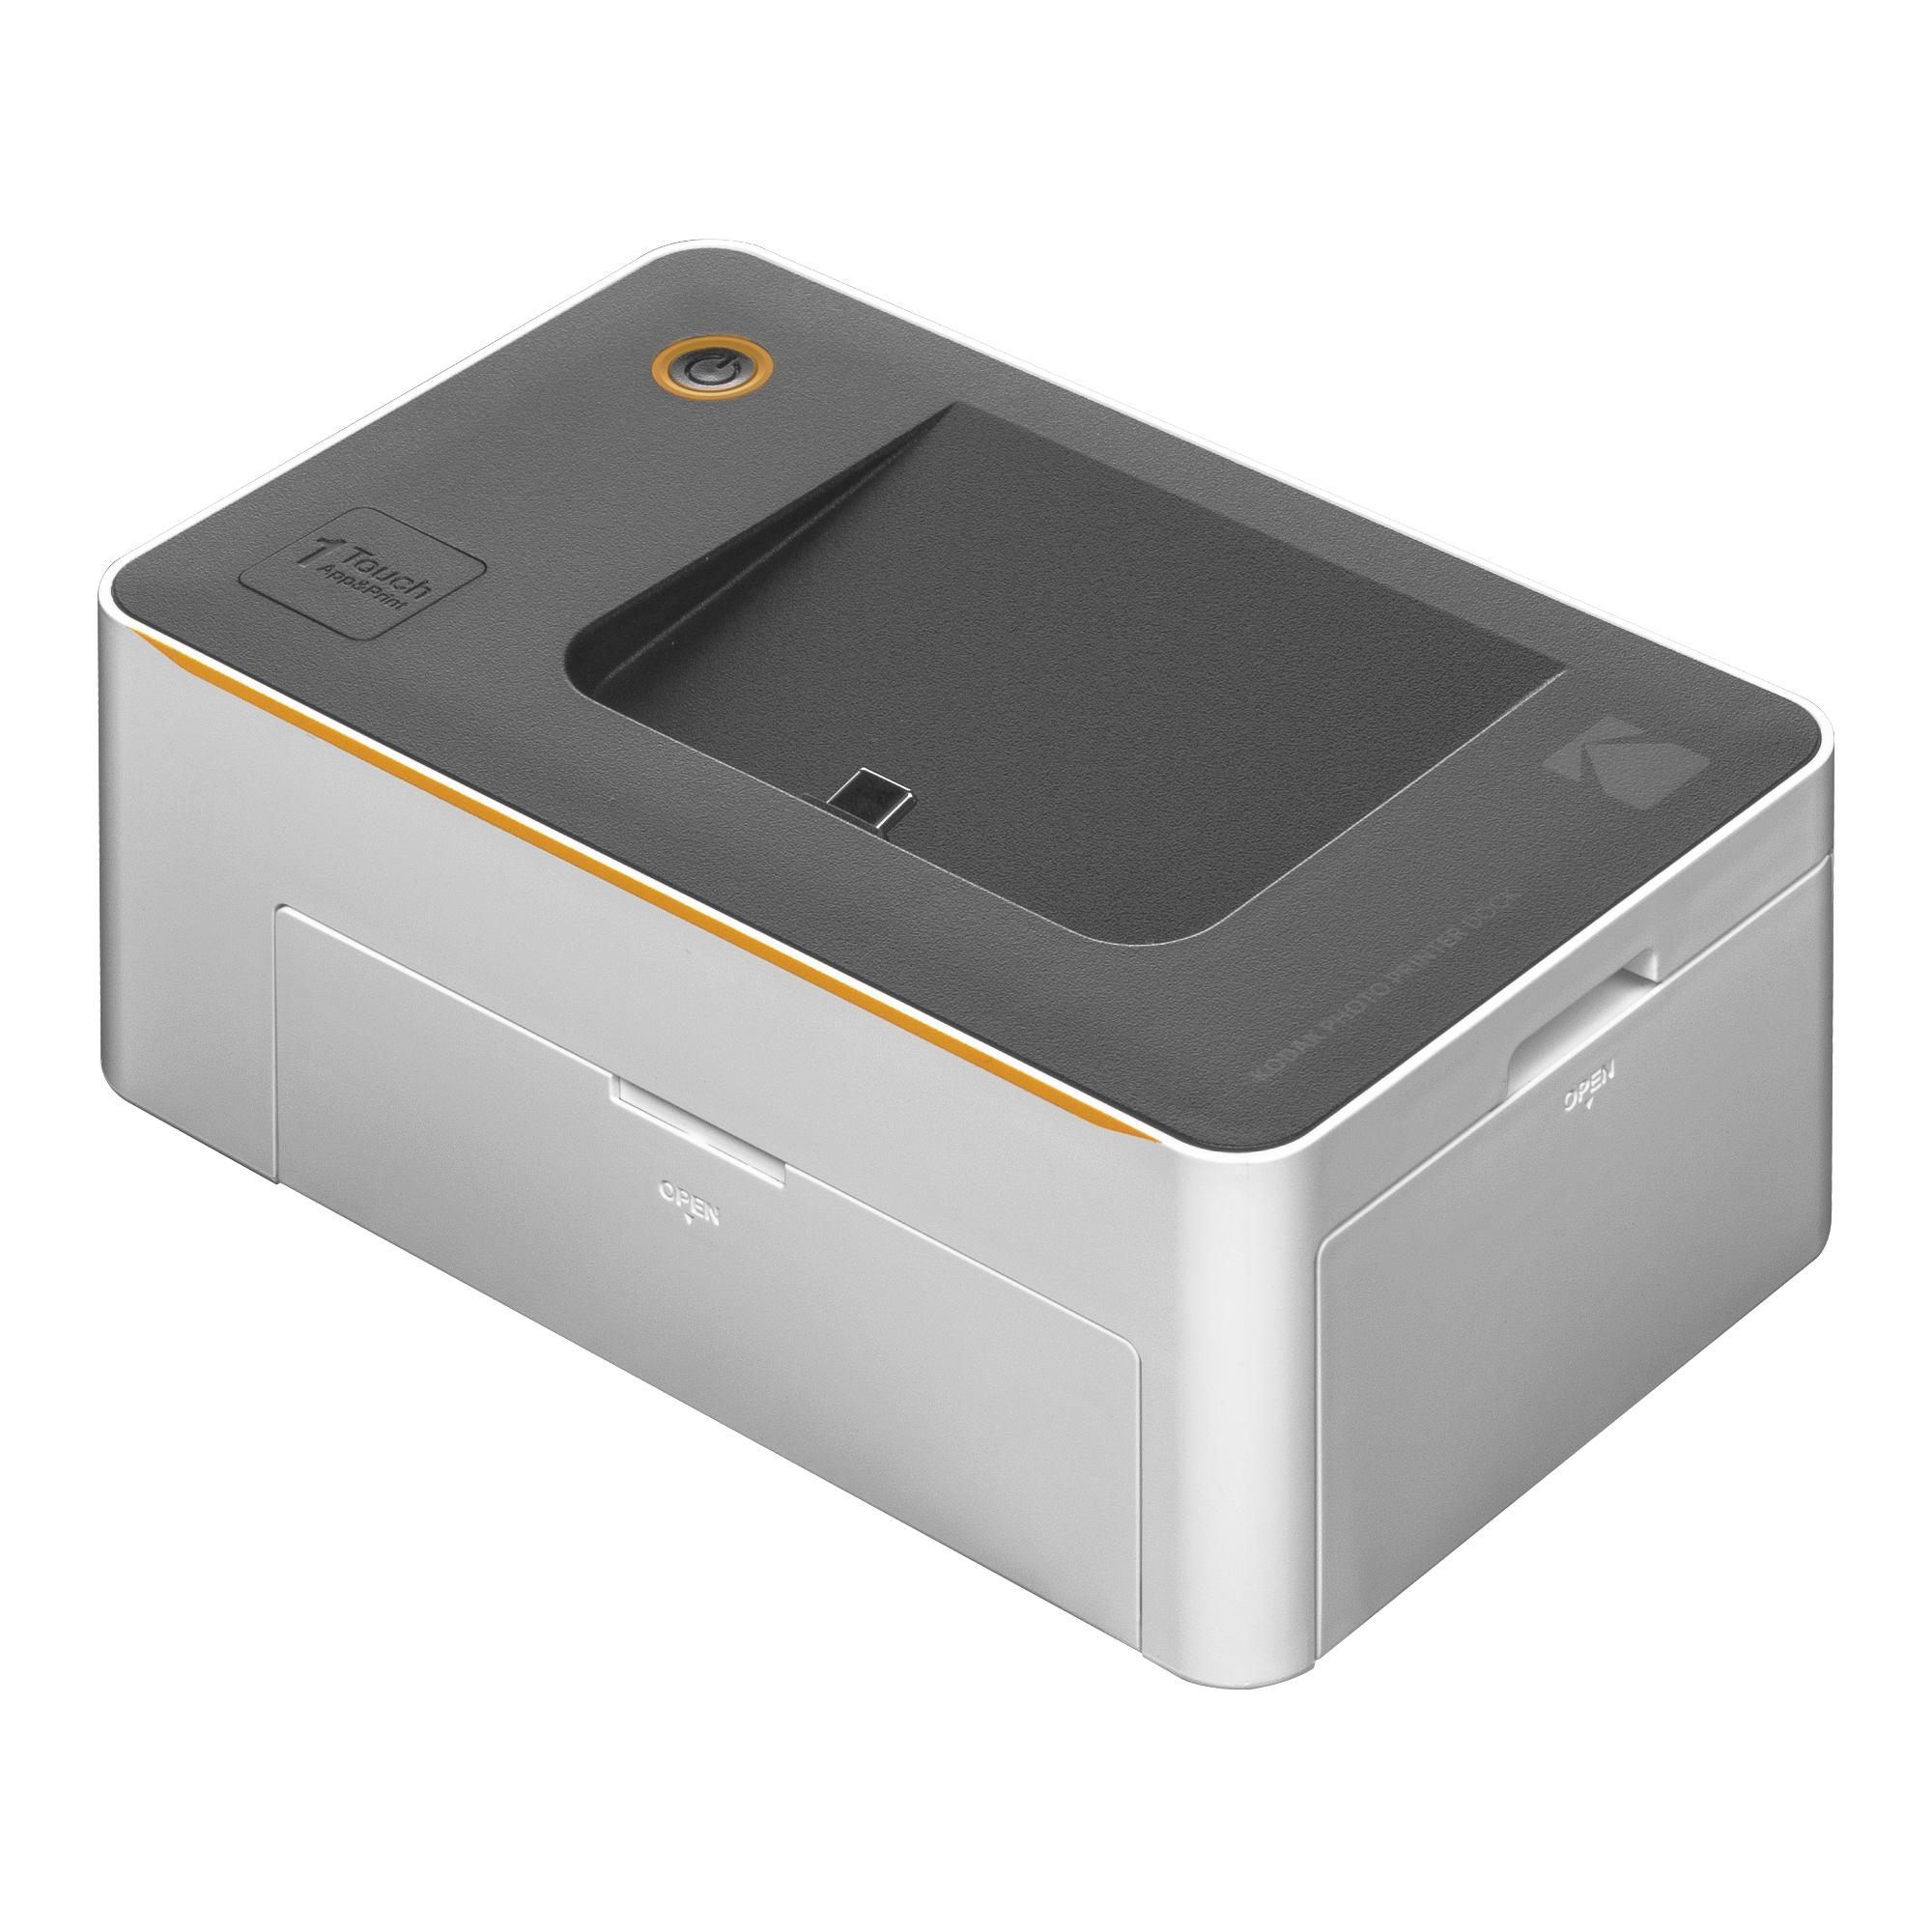 Kodak Dock Plus 4x6" Portable Photo Printer for iOS/Android, Gold PD450BT - image 4 of 4